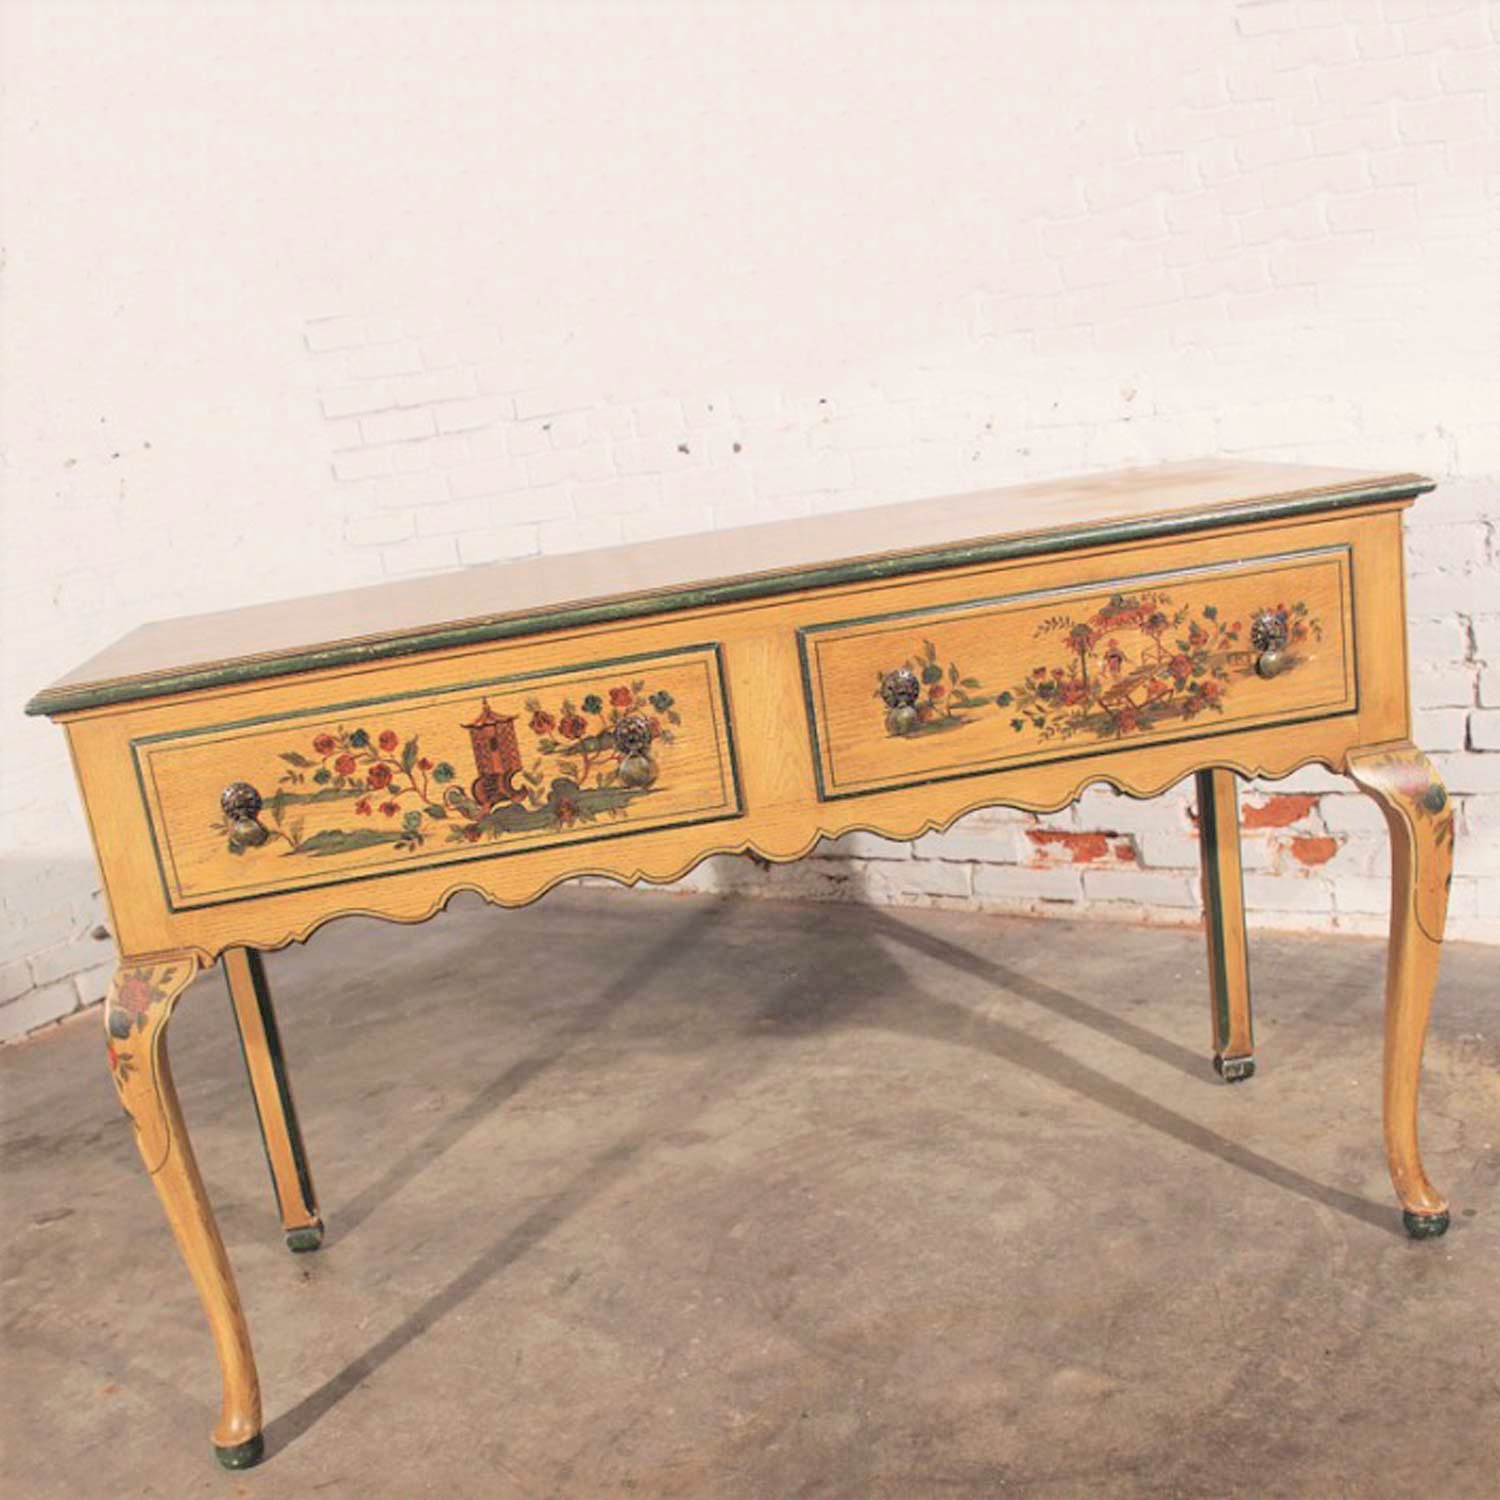 Antique Chinoiserie Hand Painted Hunt Style Buffet Server with Cabriole Legs